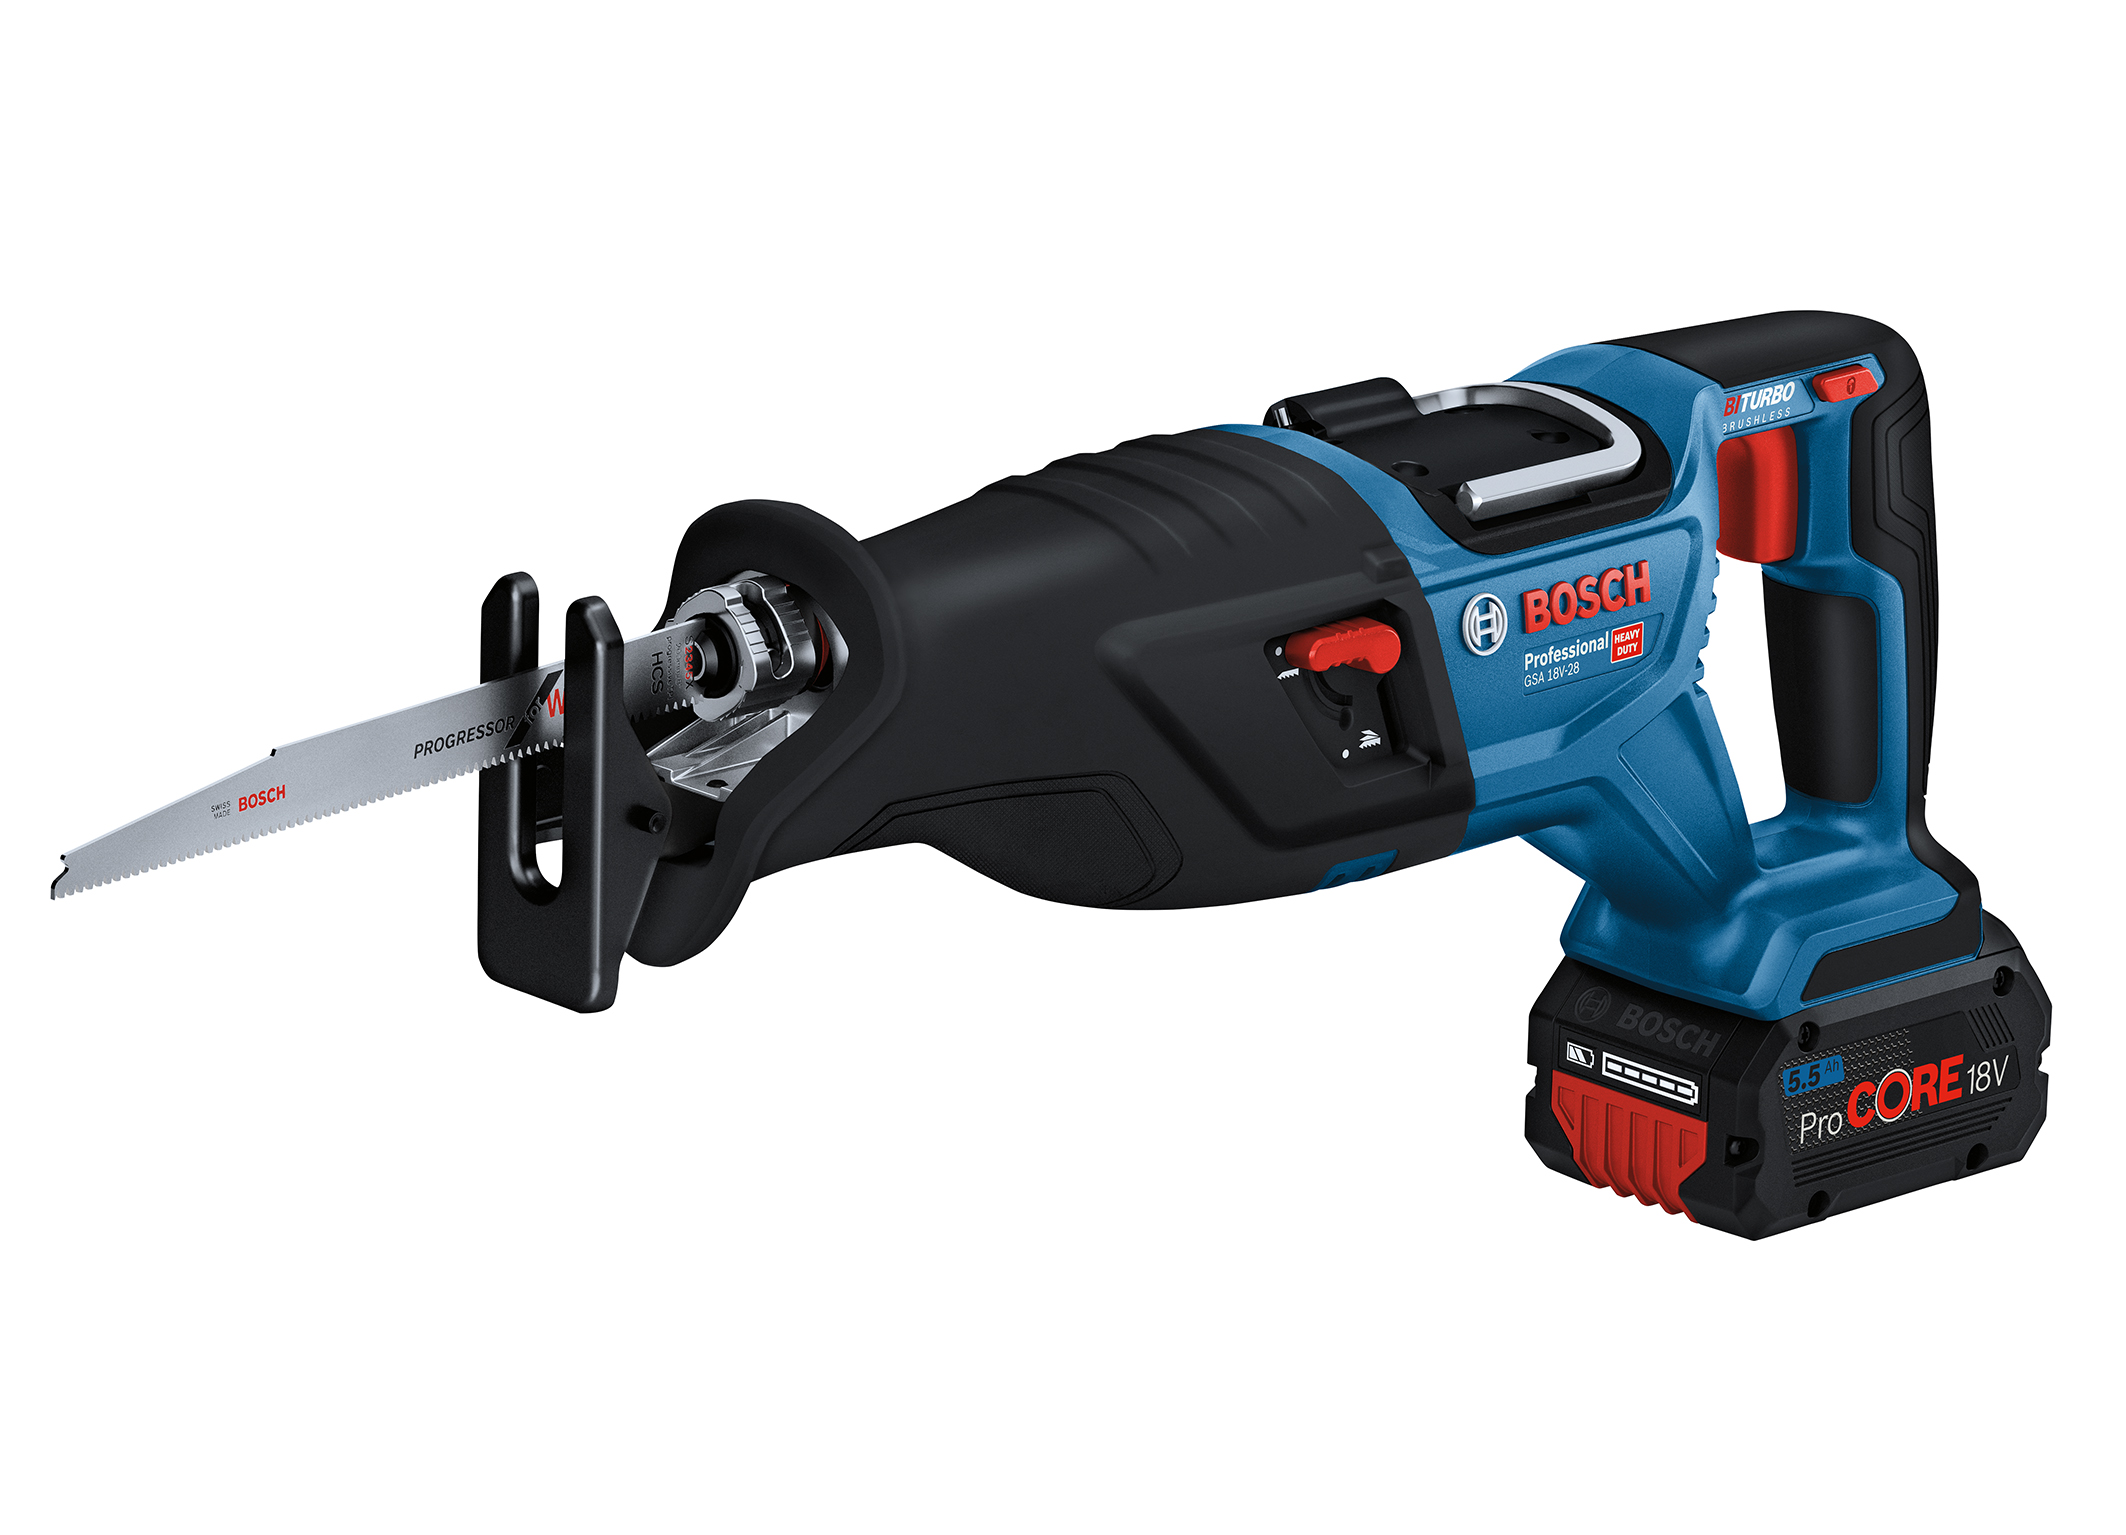 New in the Professional 18V System: Biturbo cordless reciprocating saw GSA 18V-28 Professional from Bosch